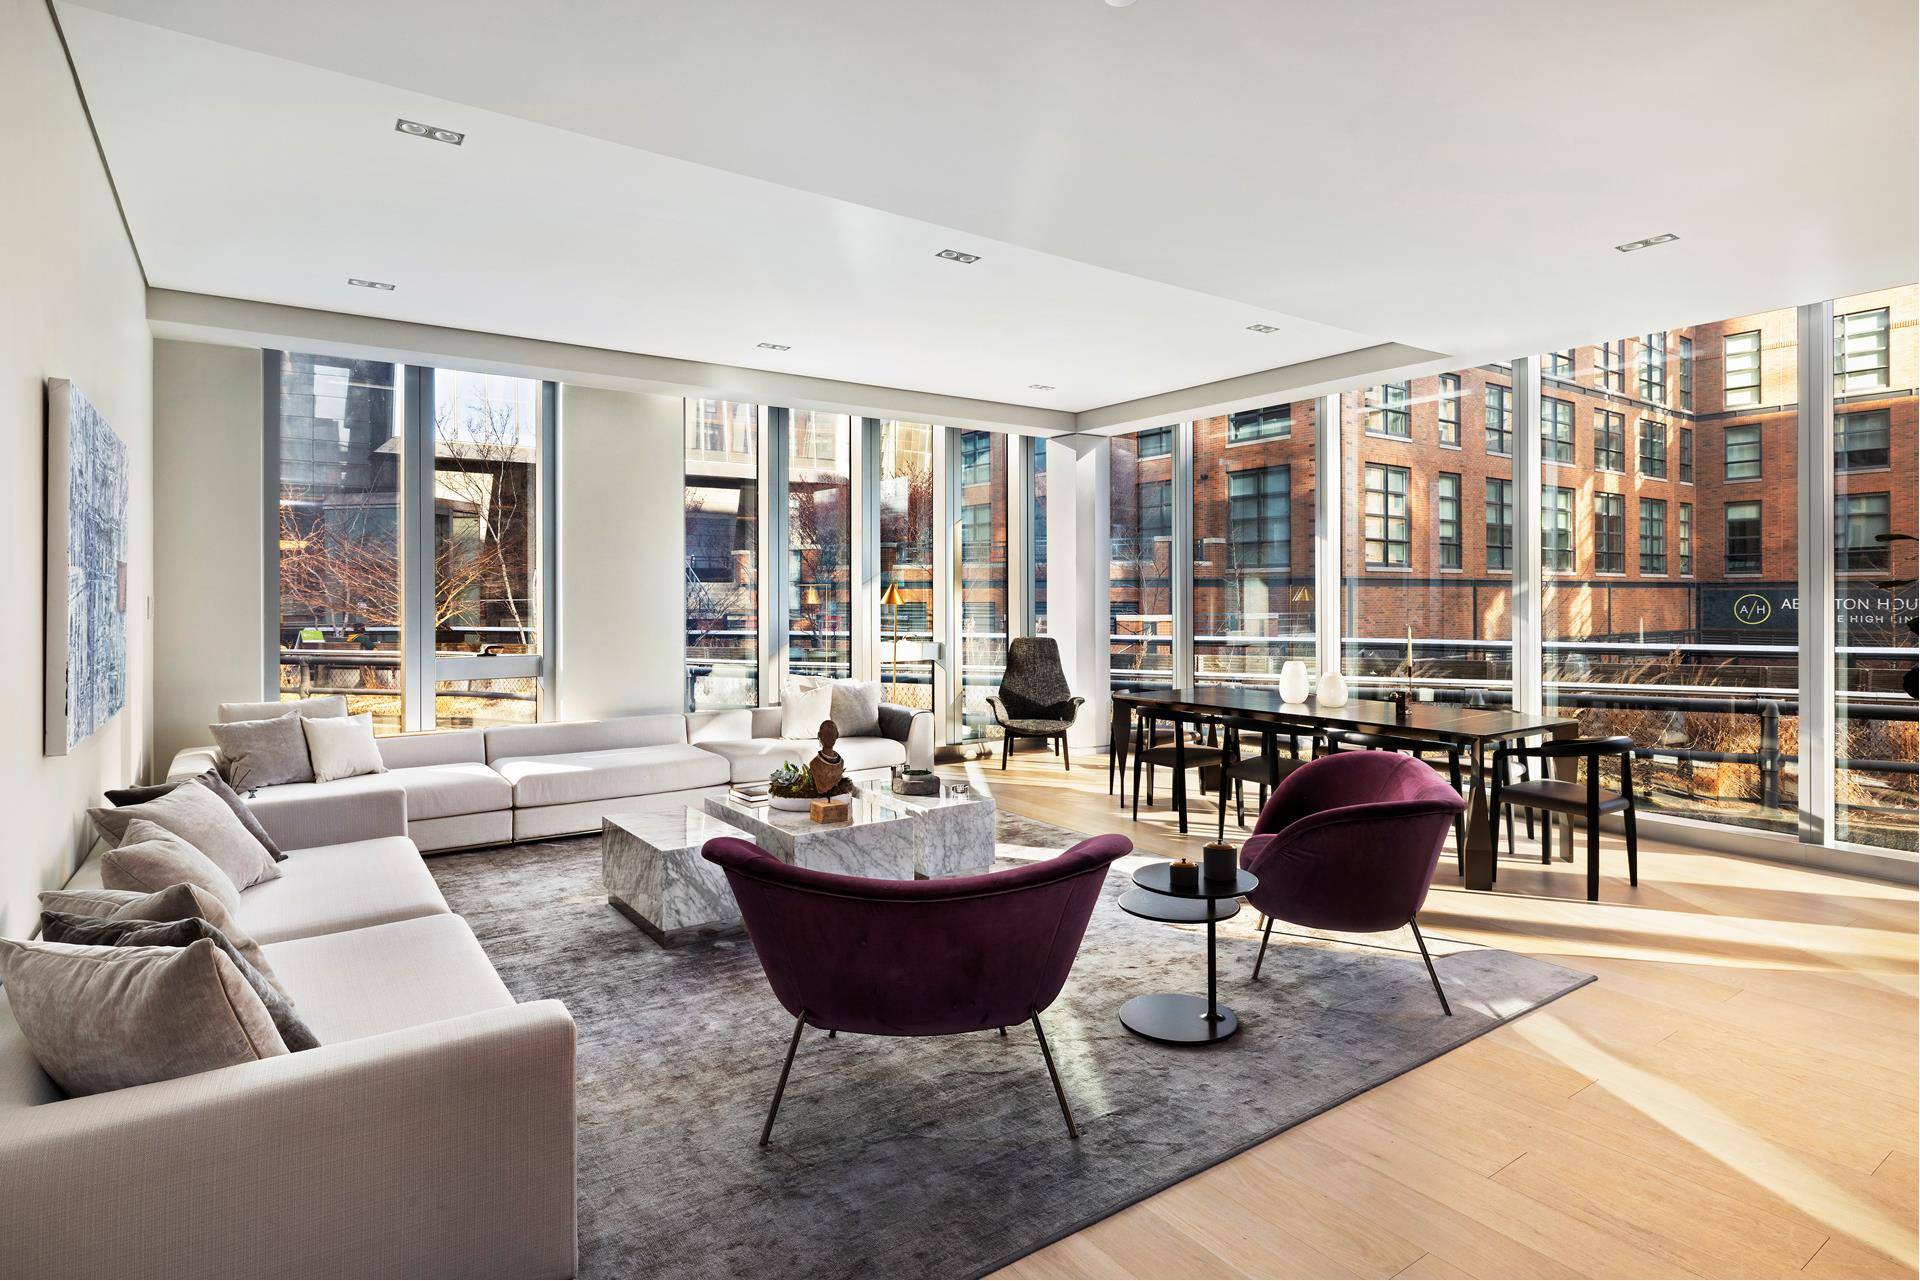 Residence 3N connects seamlessly with the iconic High Line and offers spectacular views into Hudson Yards, creating a unique sense of modern urban living.